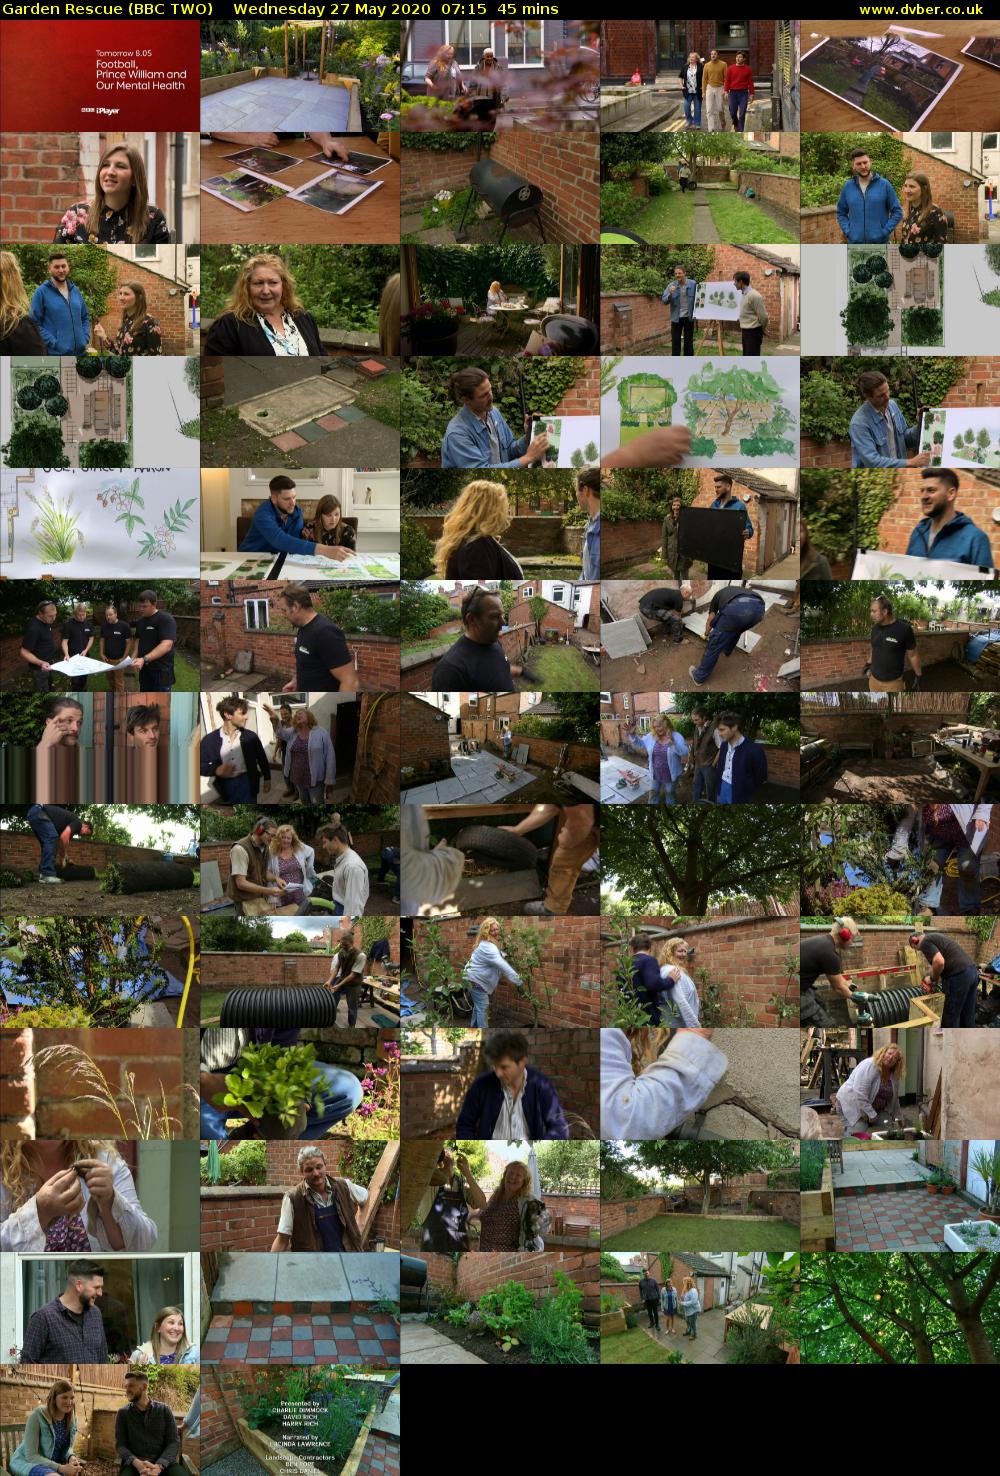 Garden Rescue (BBC TWO) Wednesday 27 May 2020 07:15 - 08:00